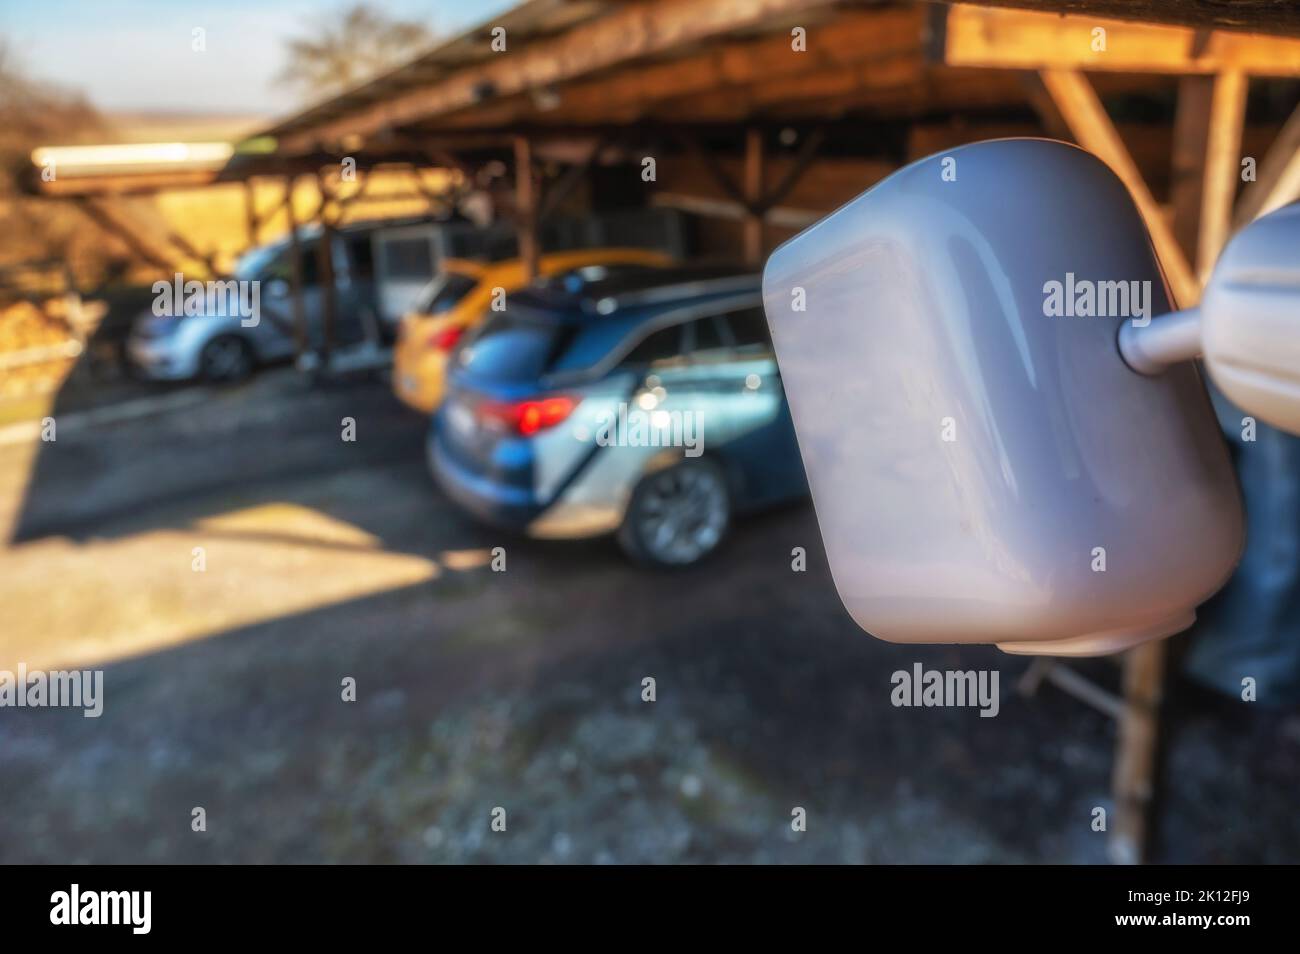 Surveillance camera for monitoring parked cars Stock Photo